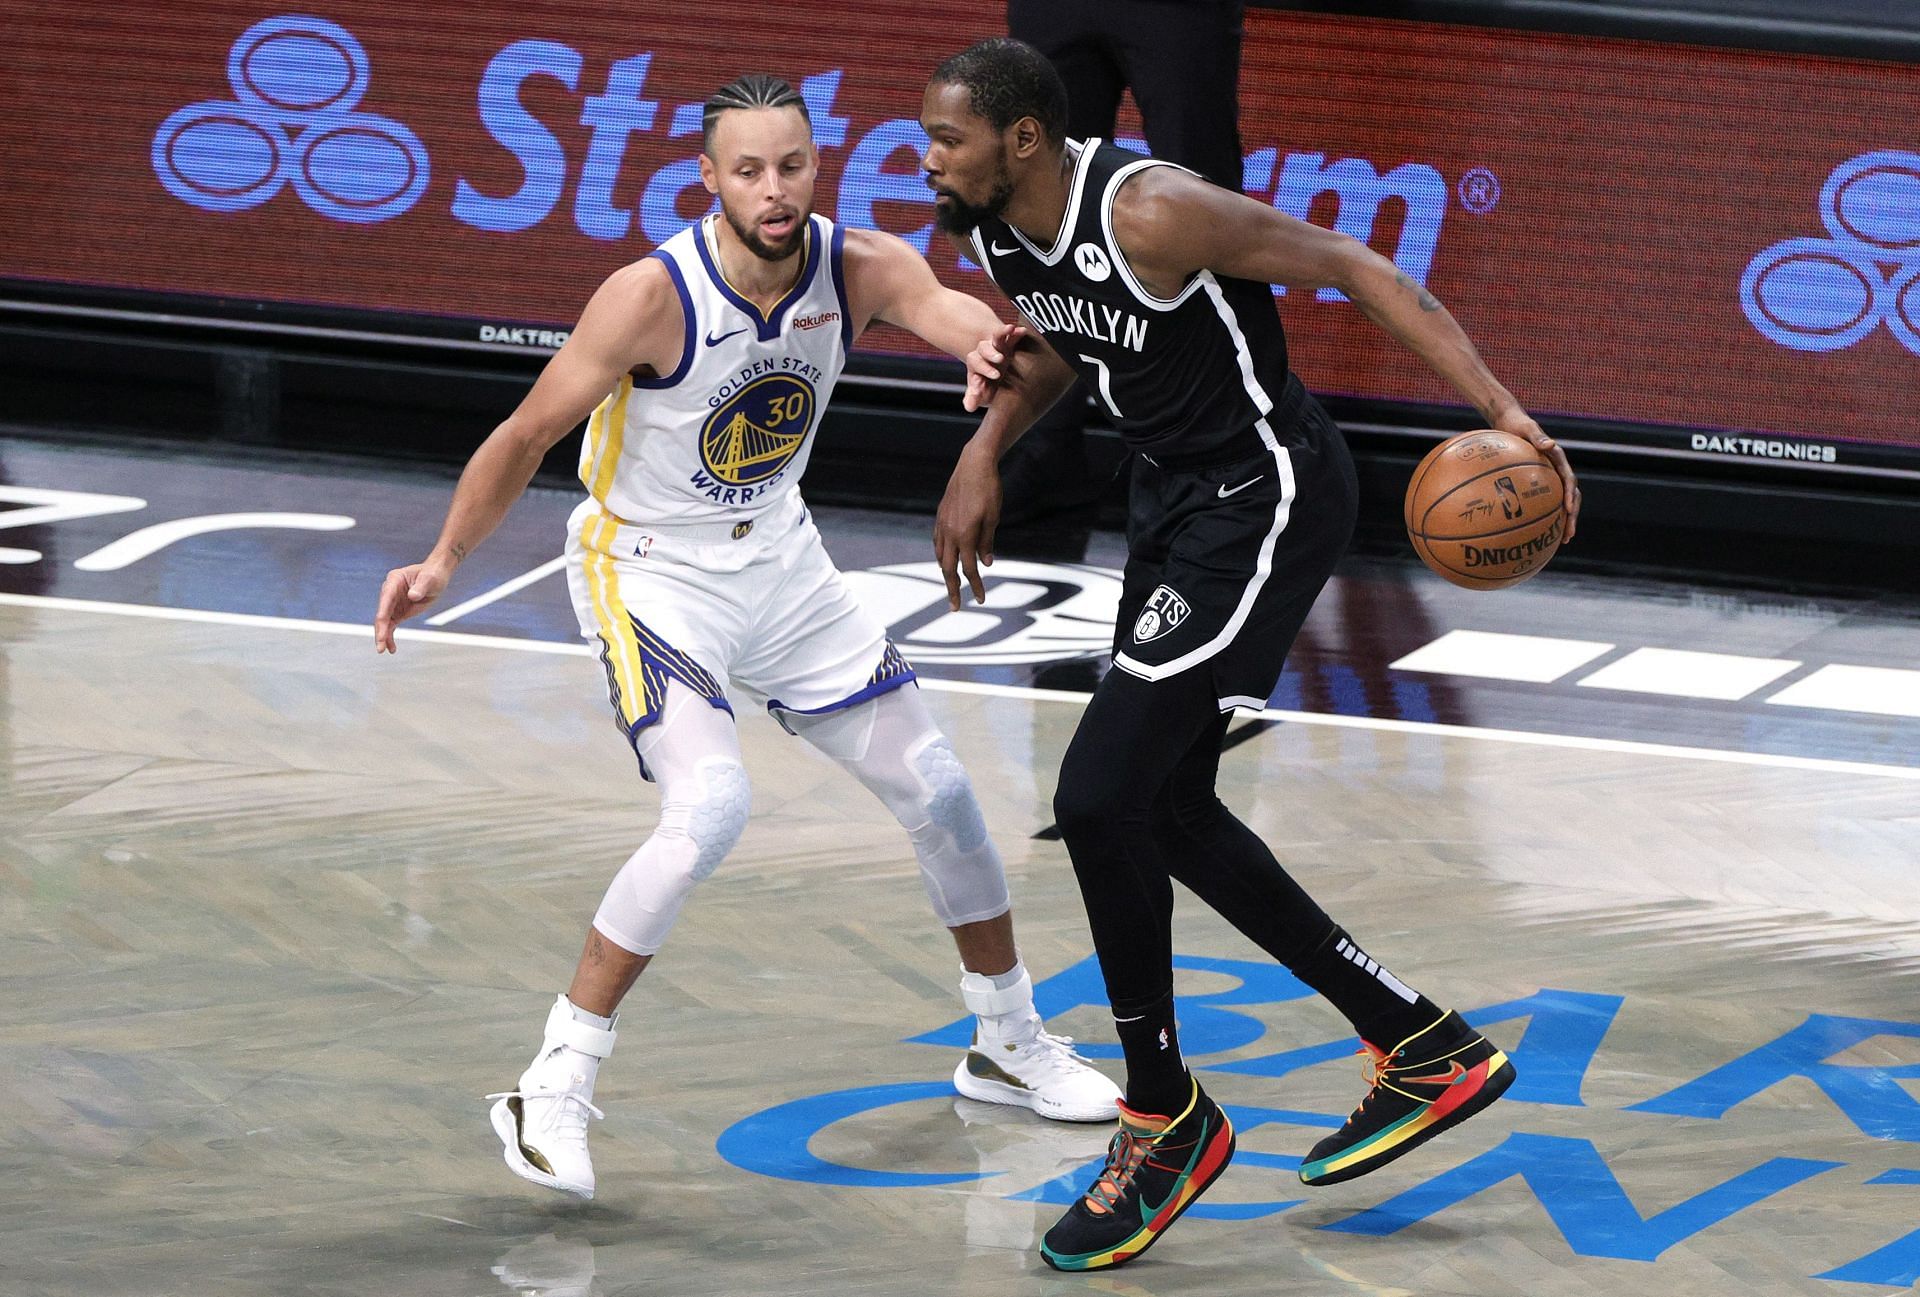 Stephen Curry of the Golden State Warriors guarding Kevin Durant of the Brooklyn Nets.